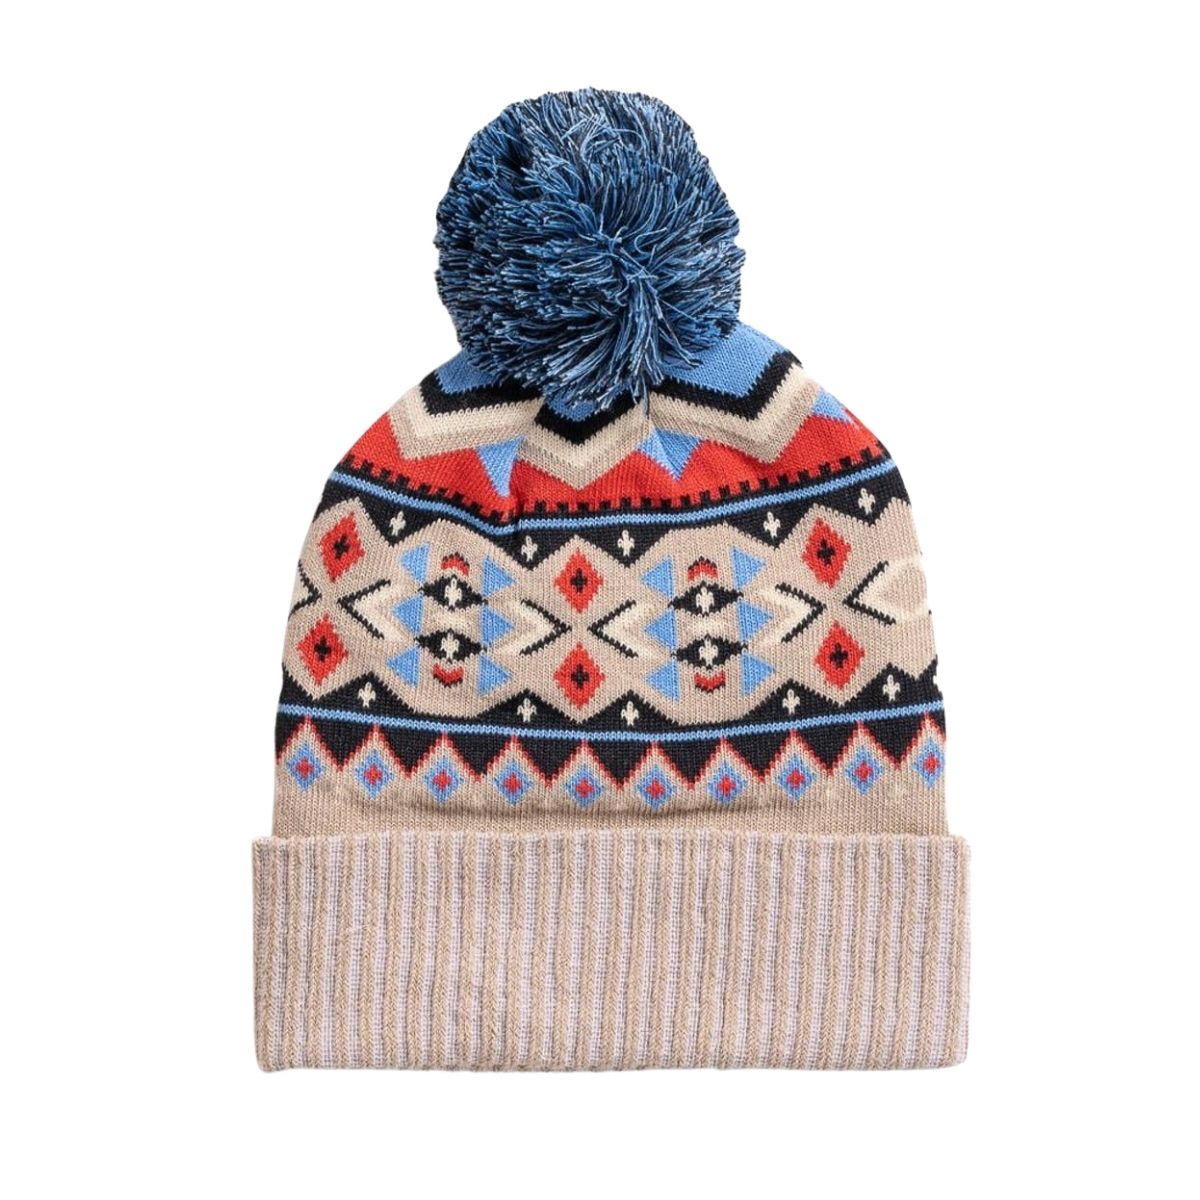 The 18 Best Men's Beanies And Winter Caps For Hiking, Adventuring, And ...